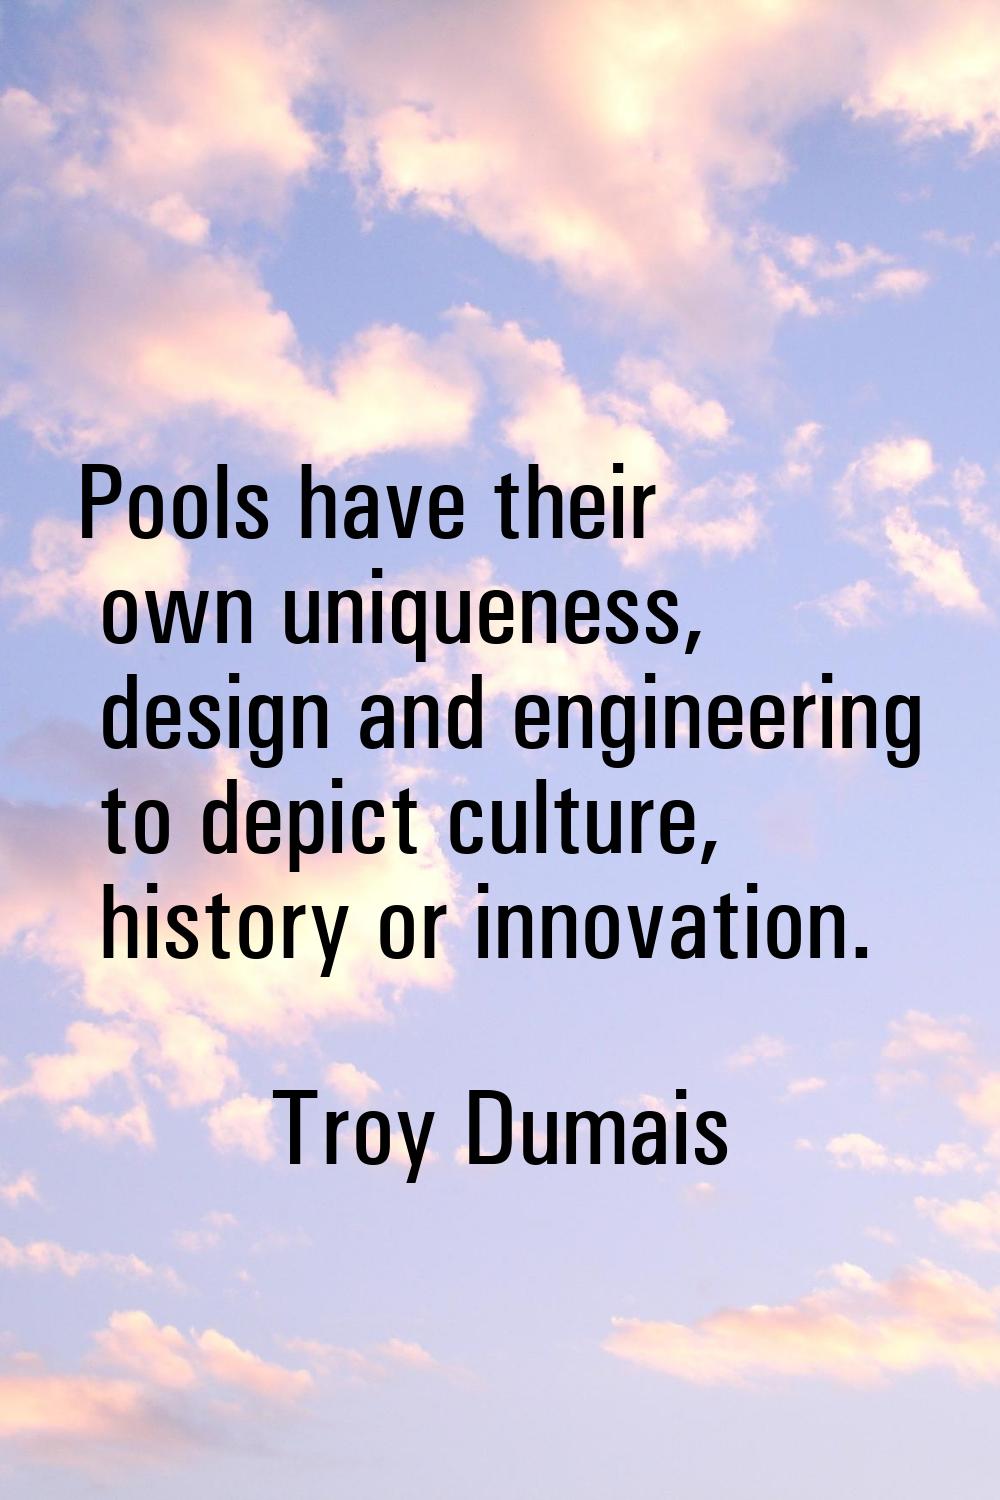 Pools have their own uniqueness, design and engineering to depict culture, history or innovation.